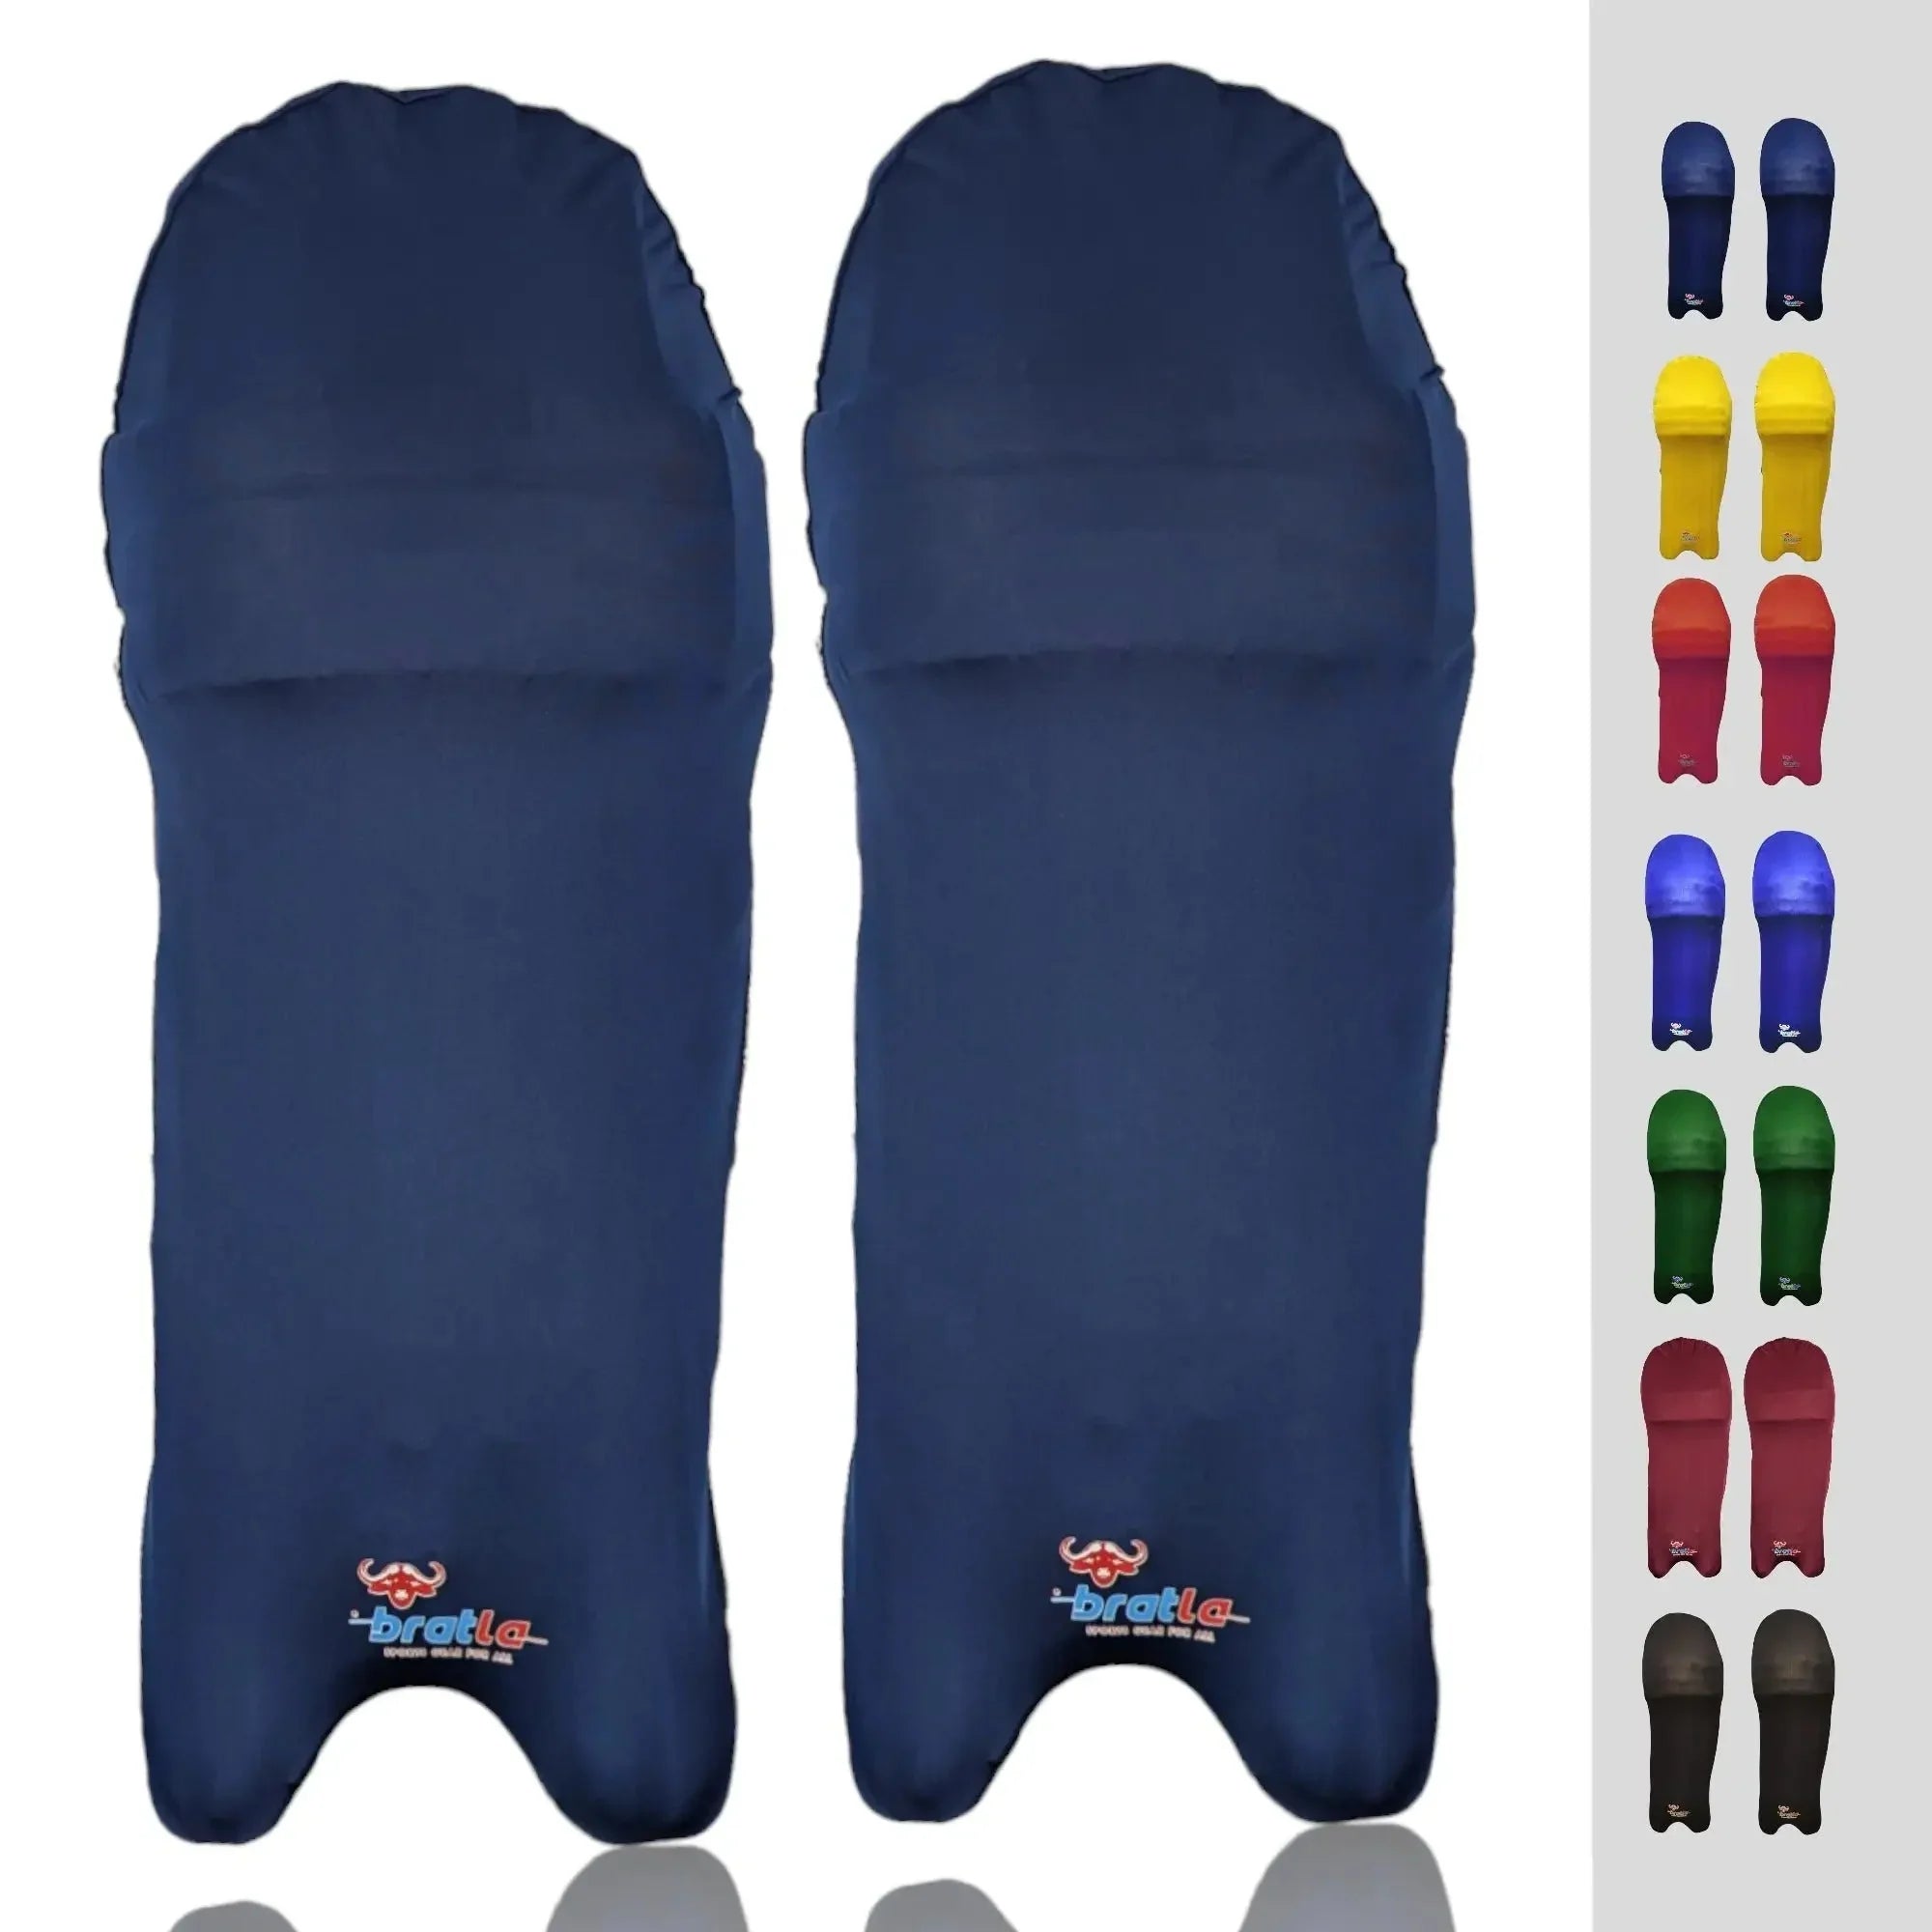 Bratla Cricket Batting Pad Covers Fit Neatly Easily Put On - Navy - PADS - BATTING COVER